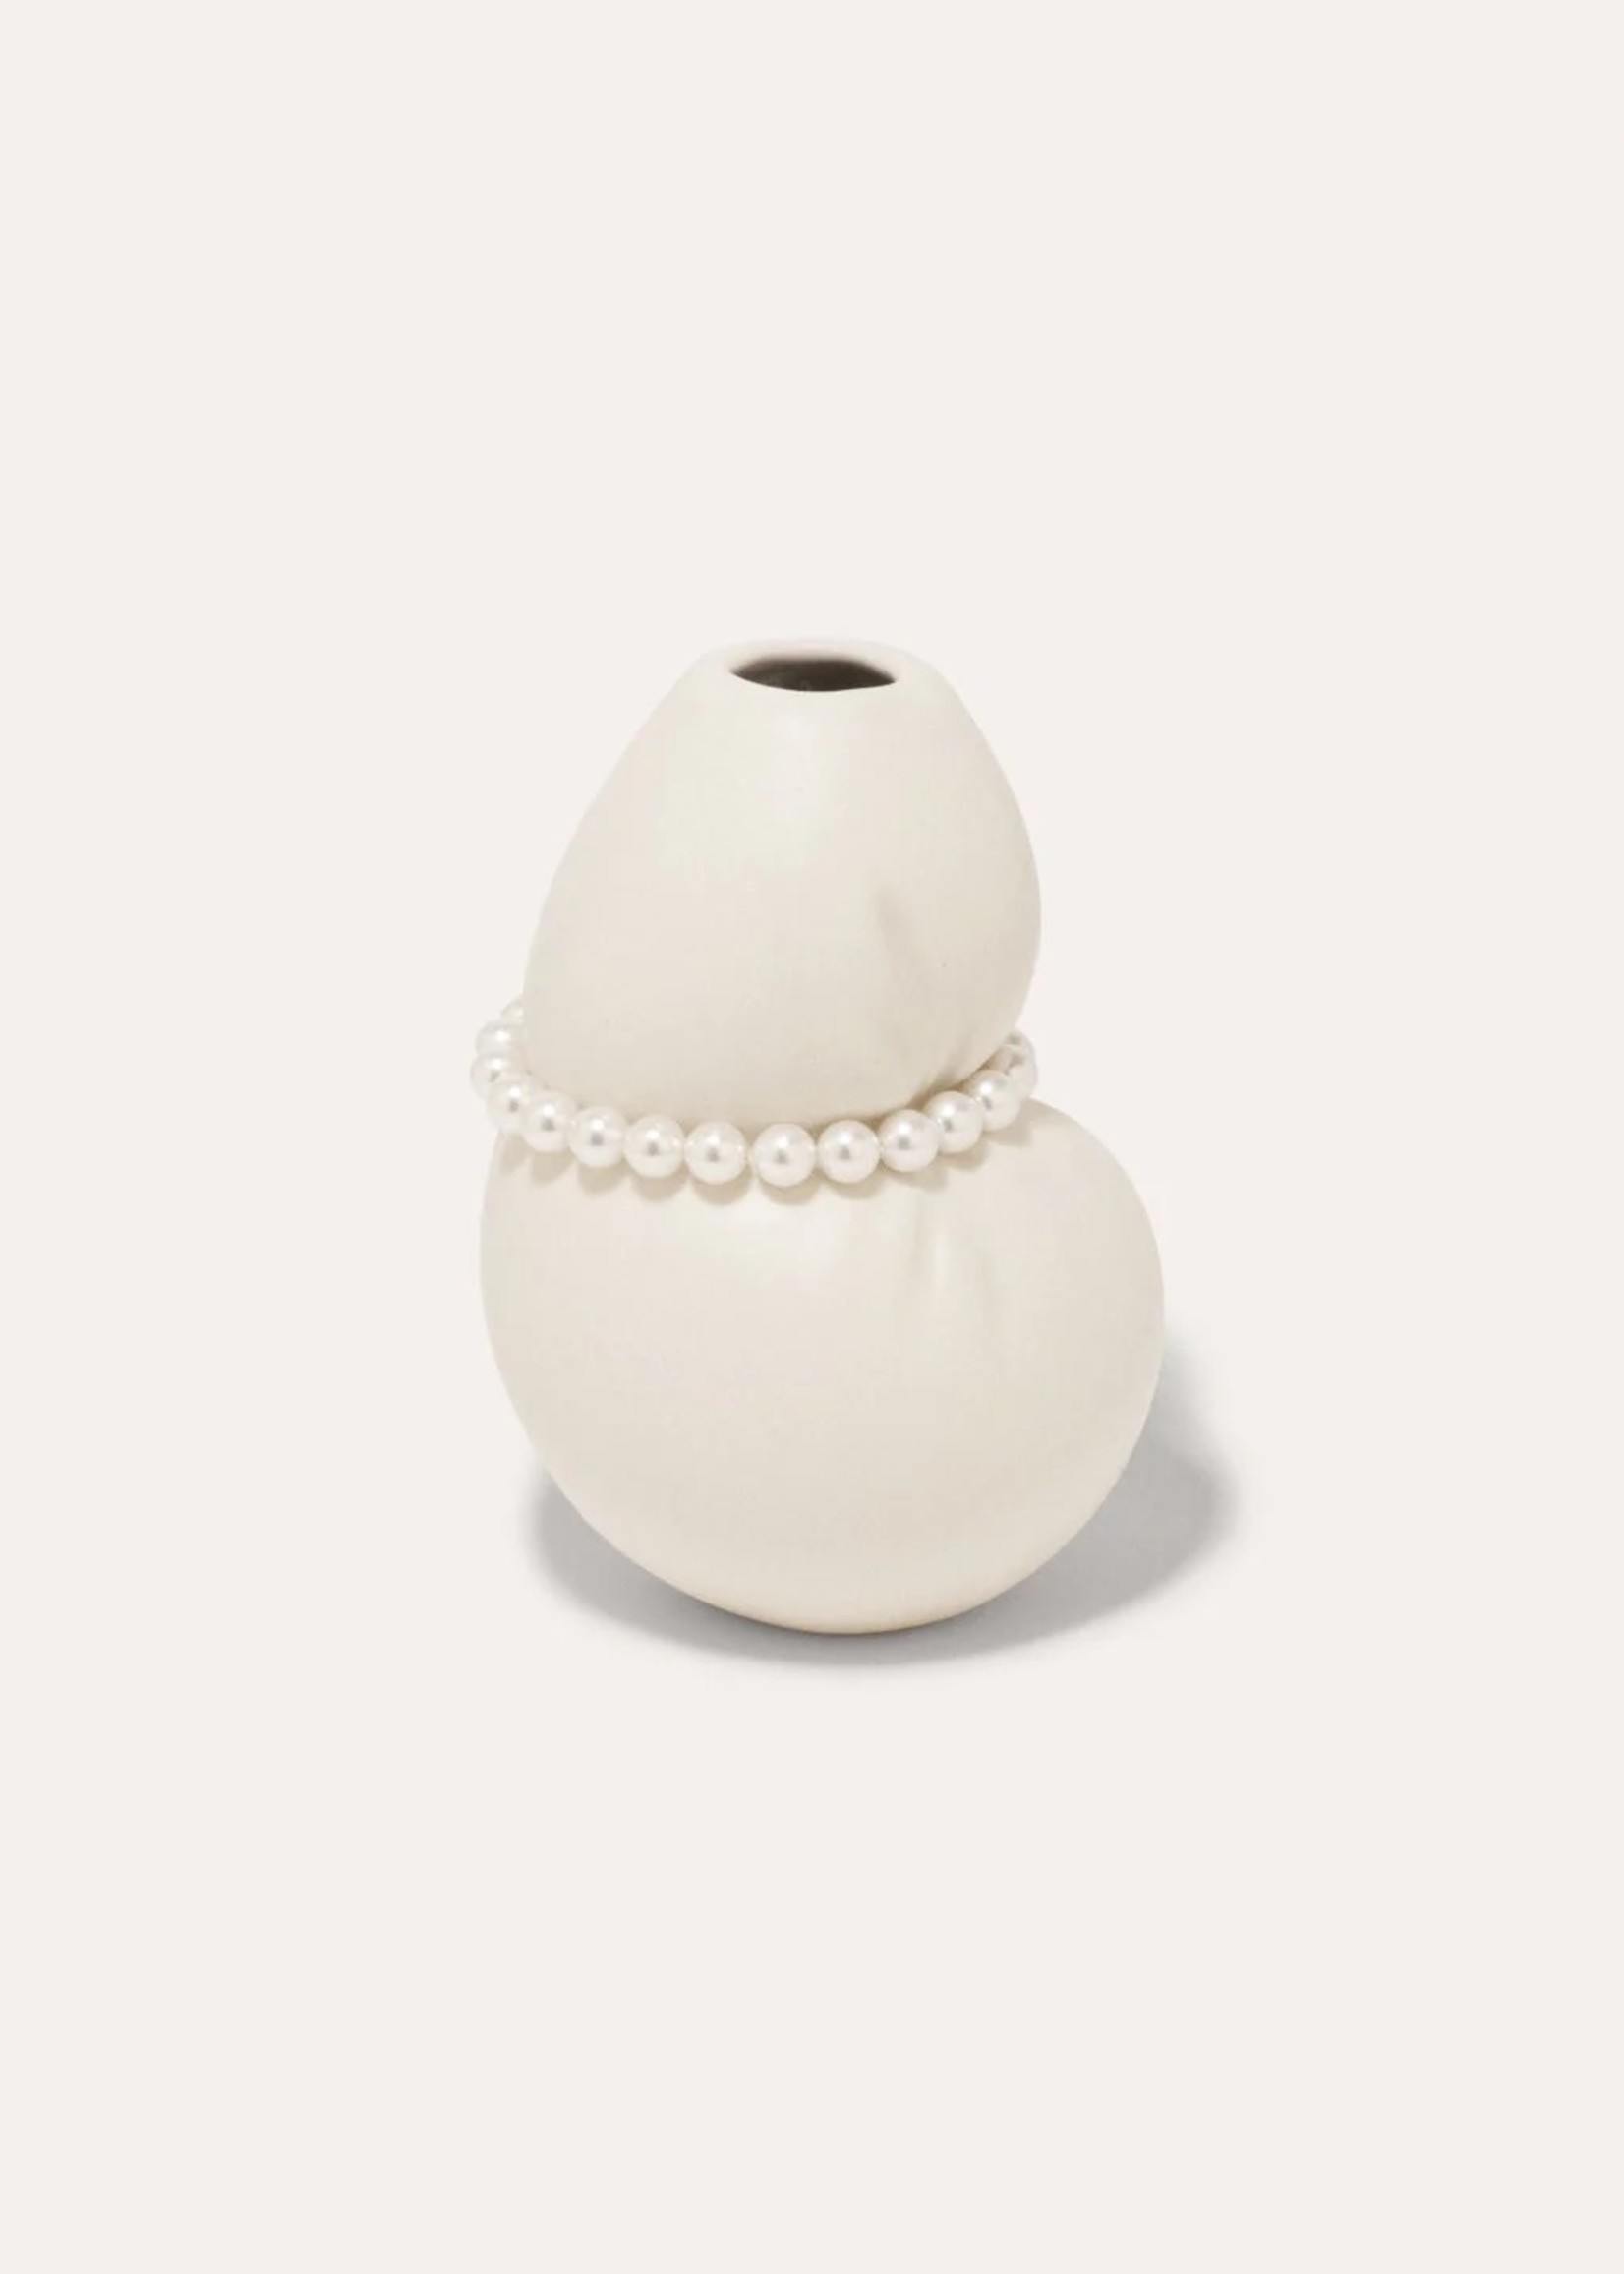 Completedworks Squeezed vase in Matte White with Faux Pearls